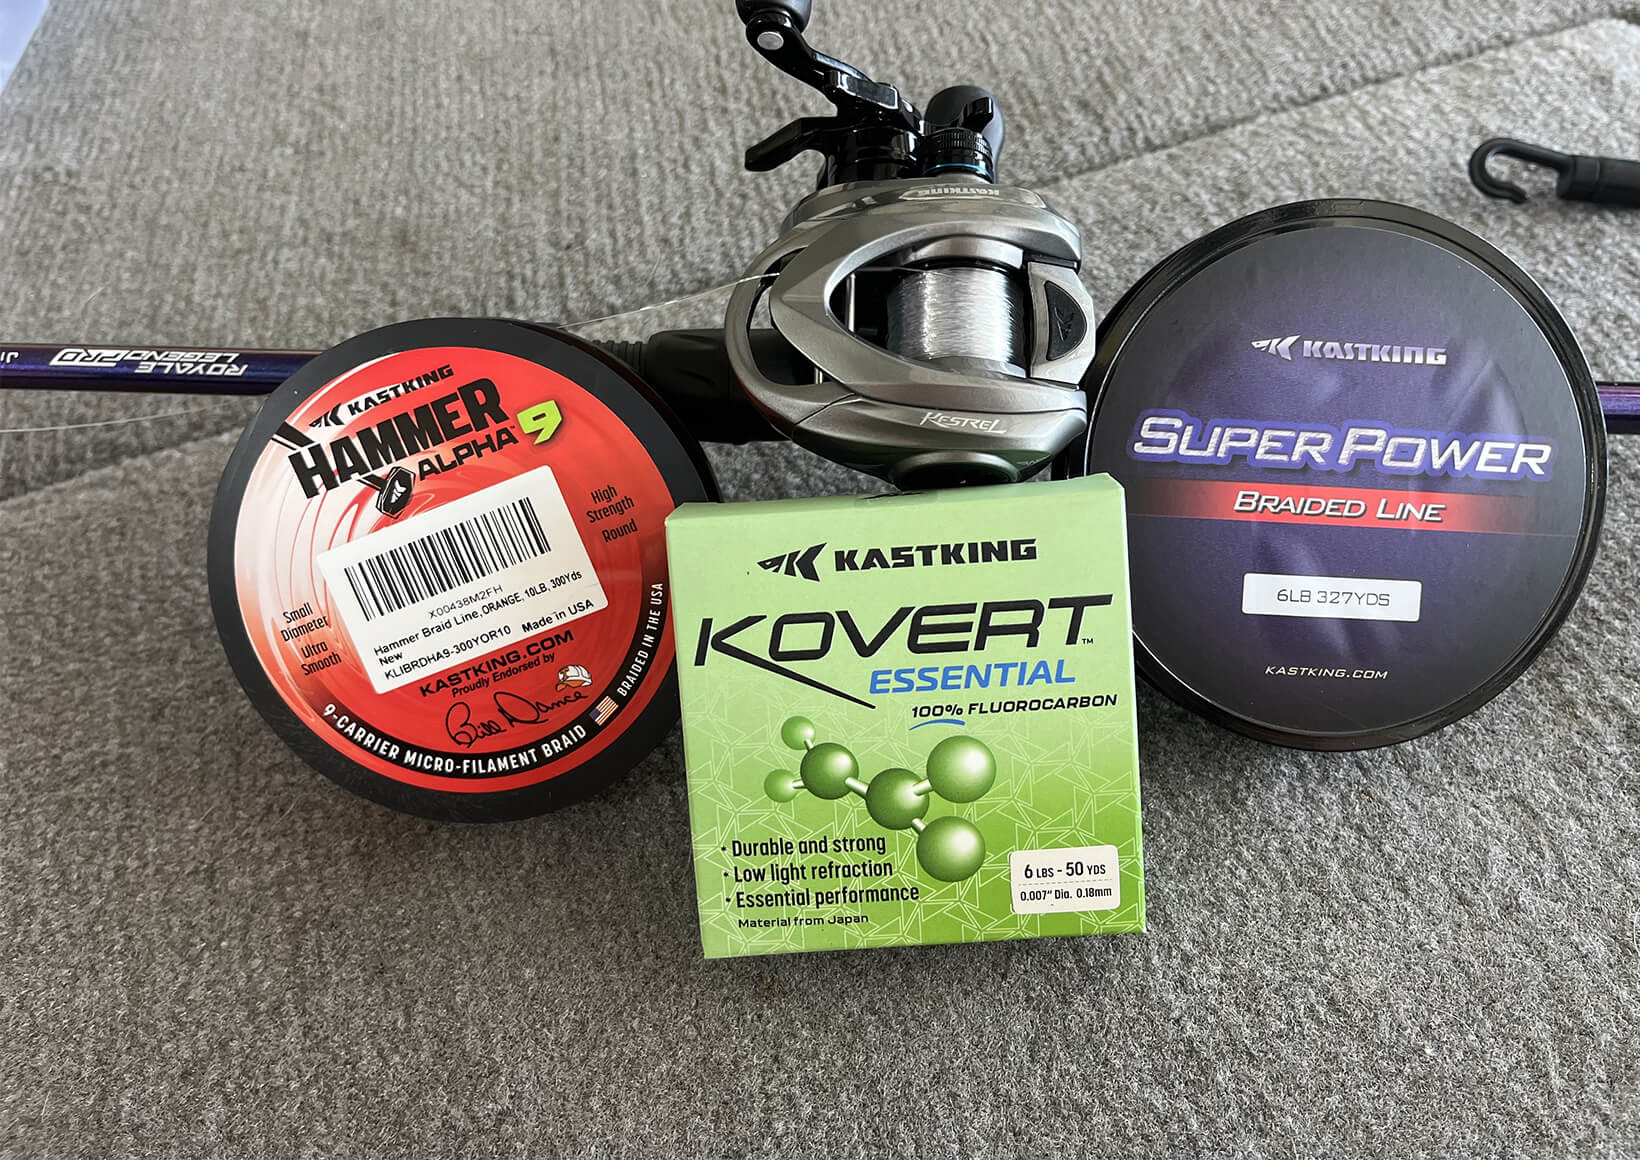 One of the most critical factors when bait finesse fishing will be your line. Small diameter braid combined with a fluorocarbon leader will go a long way in achieving casting distance with light lures.